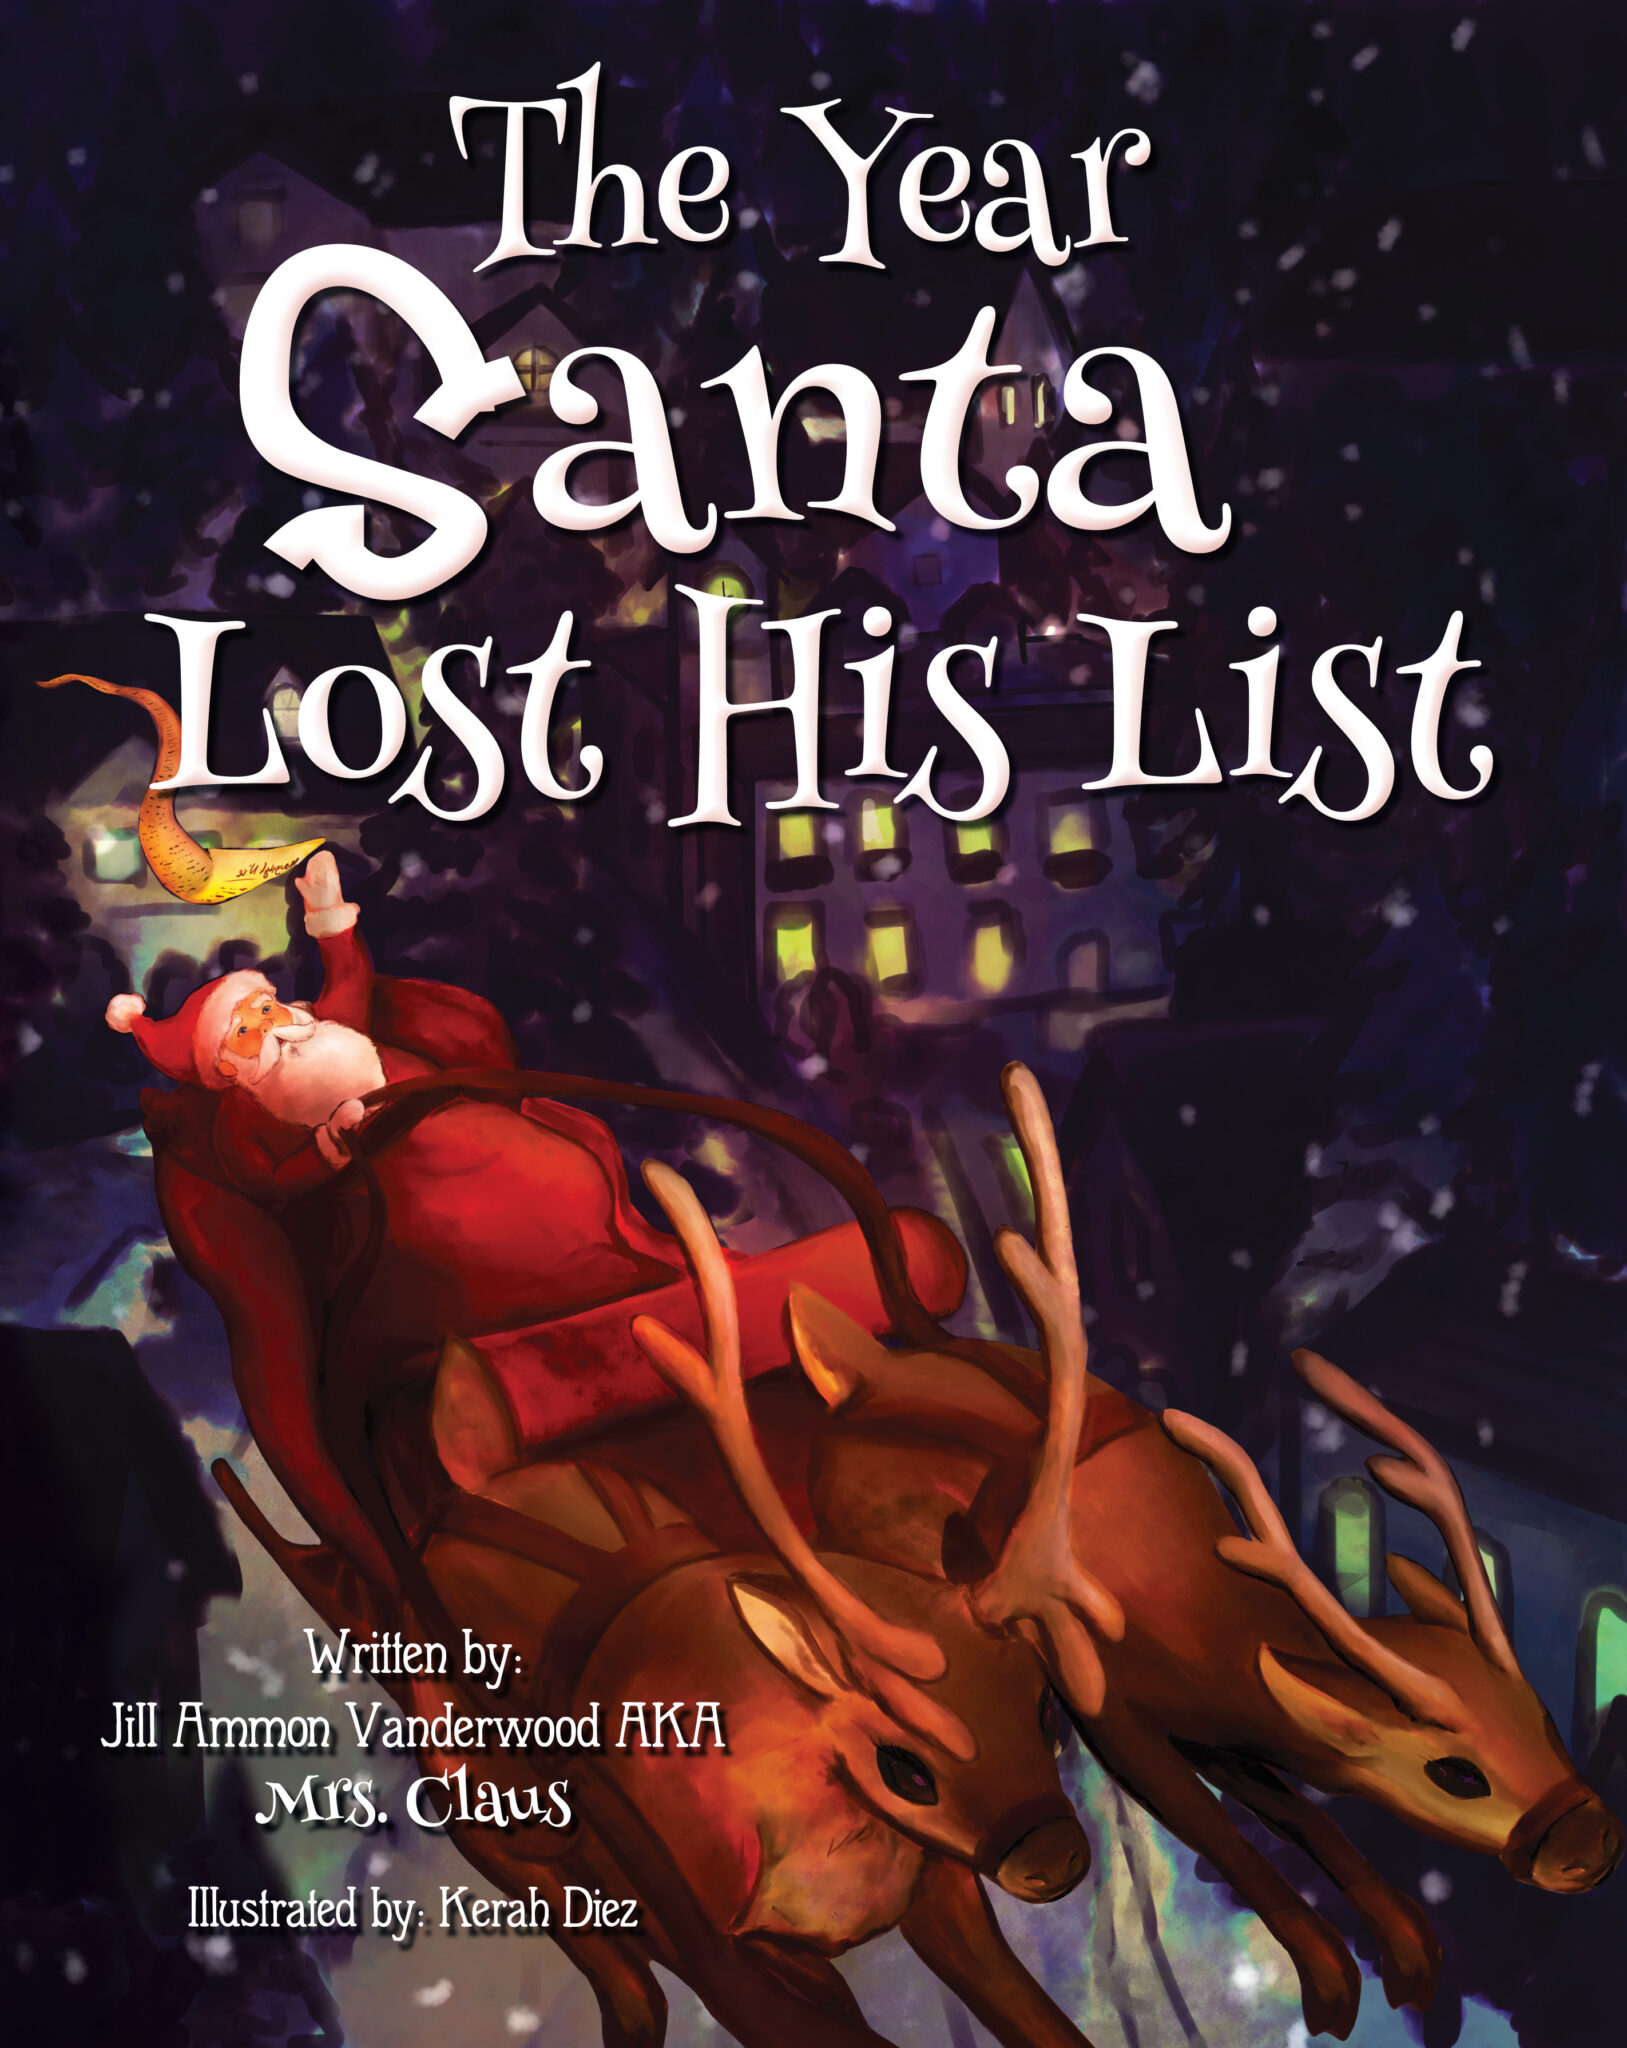 book review the year santa lost his list